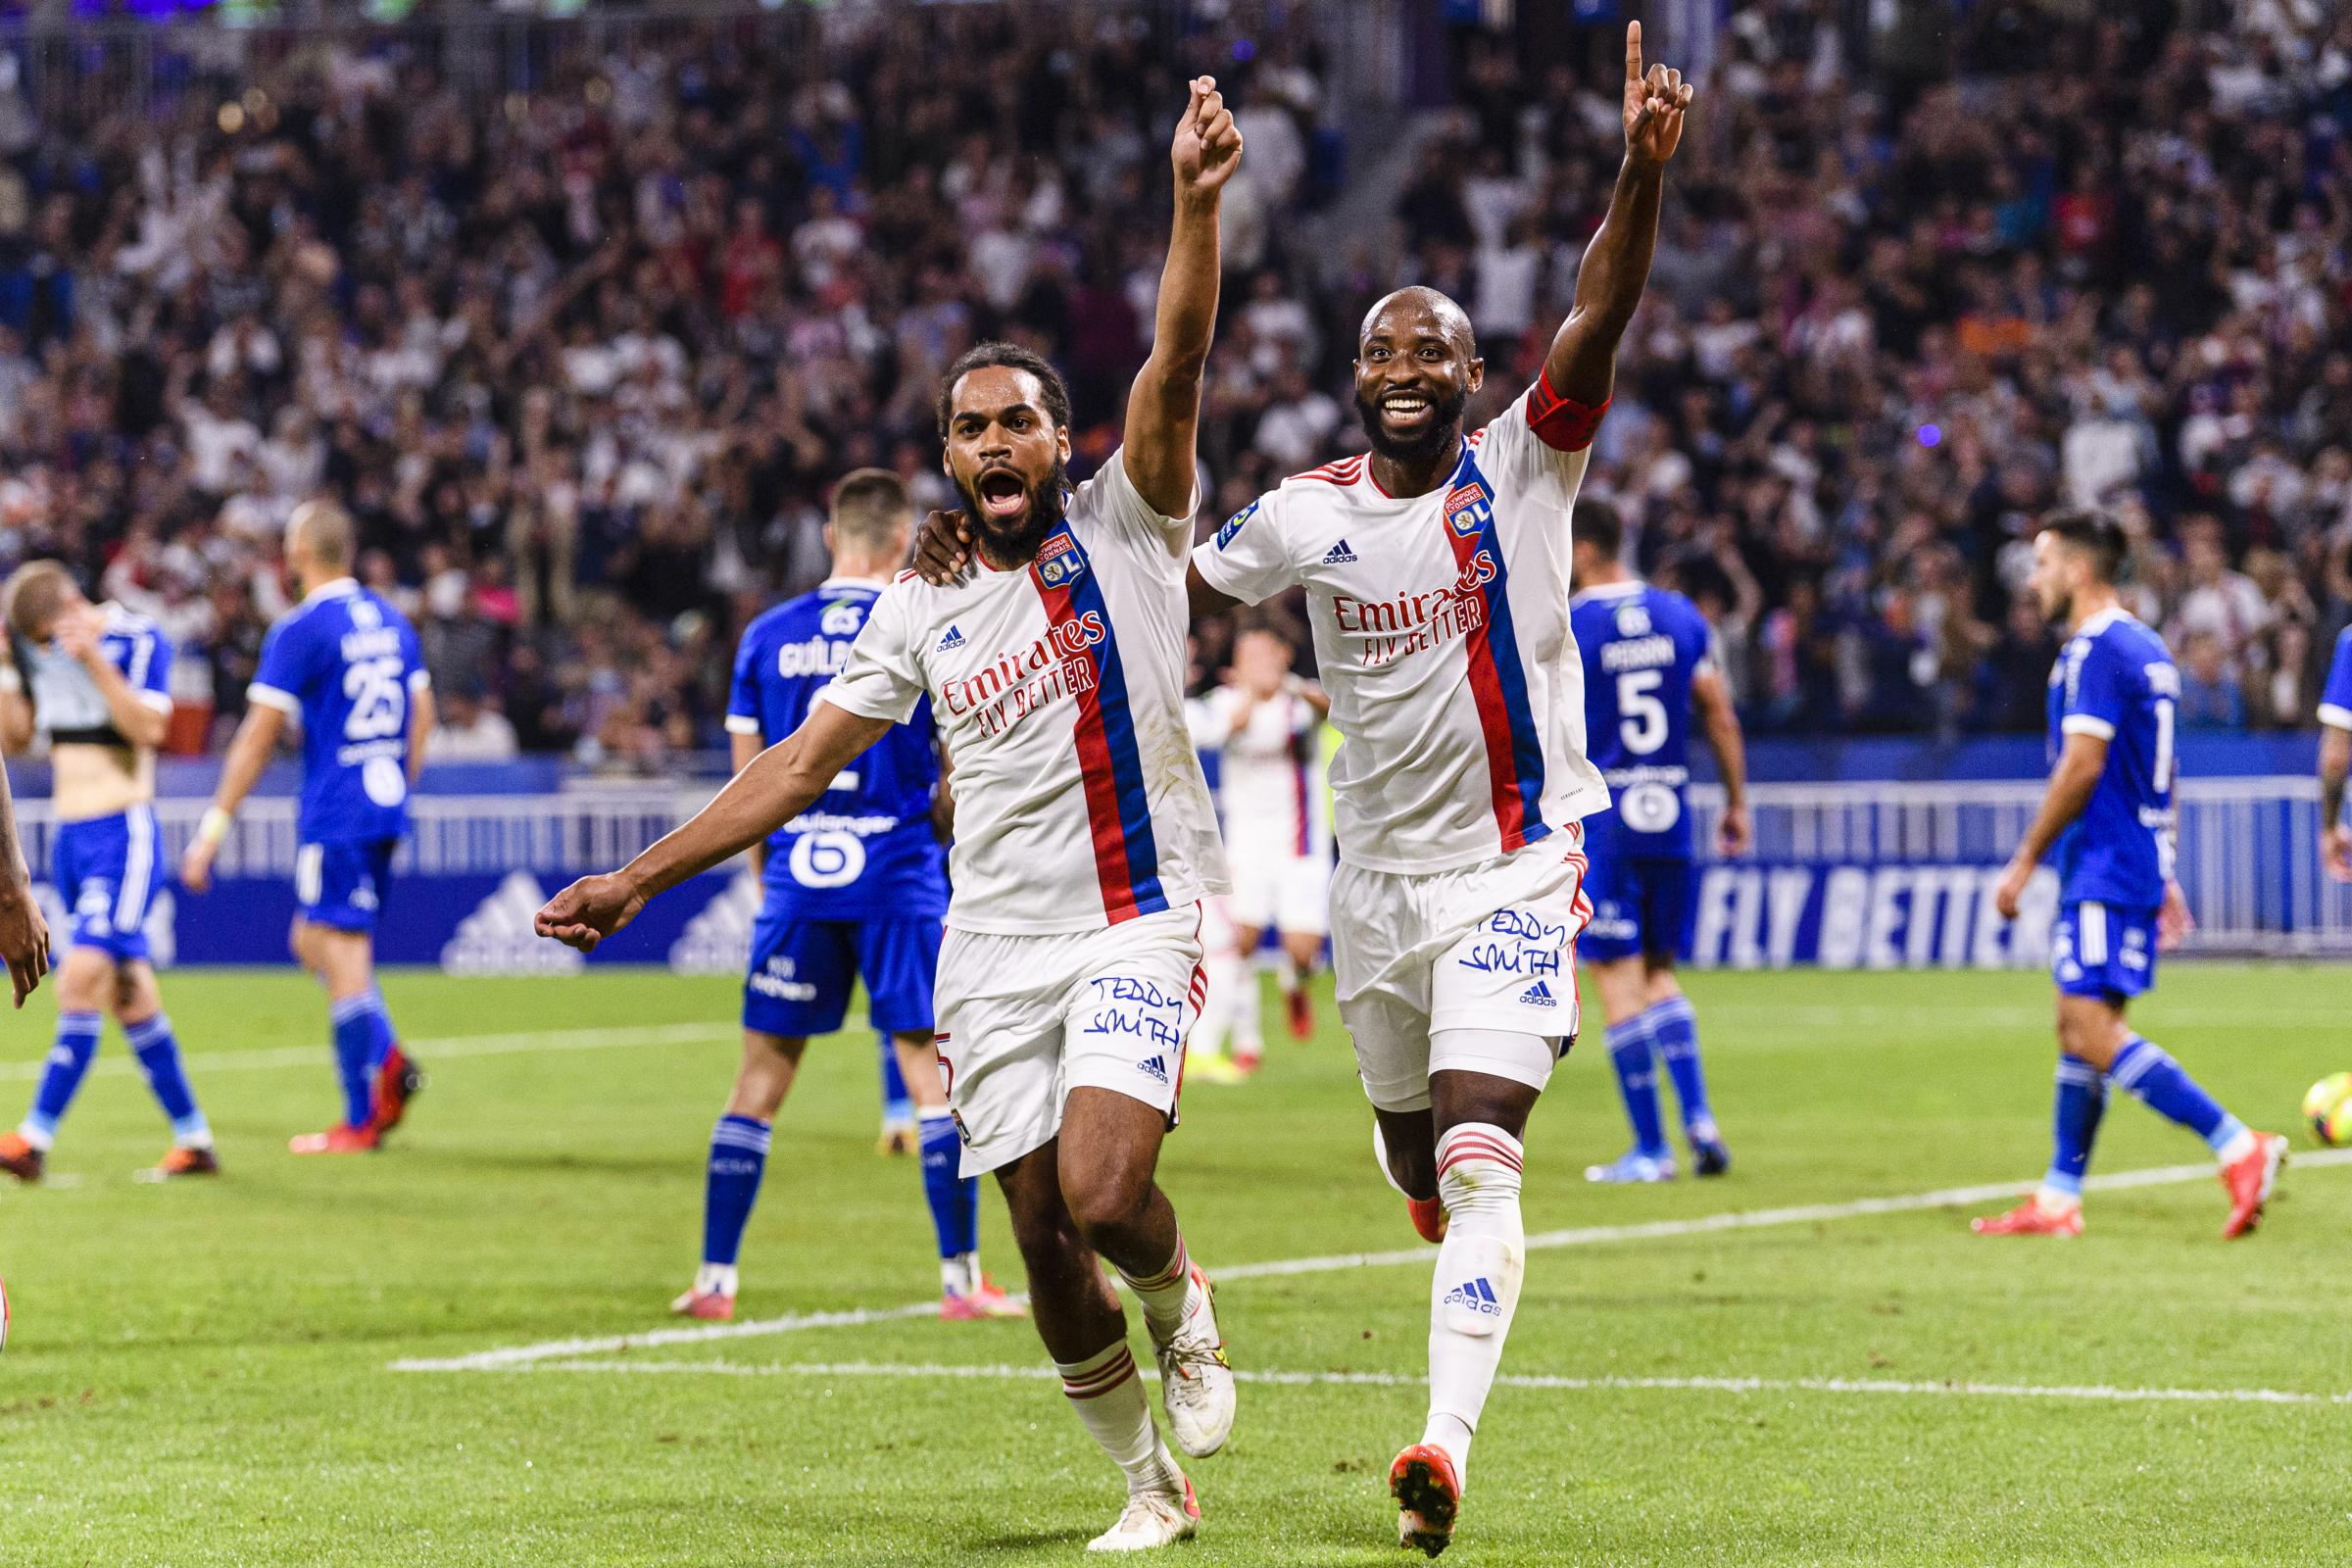 They can make them cry: French football expert on how Rangers can stun Lyon in Europa League opener